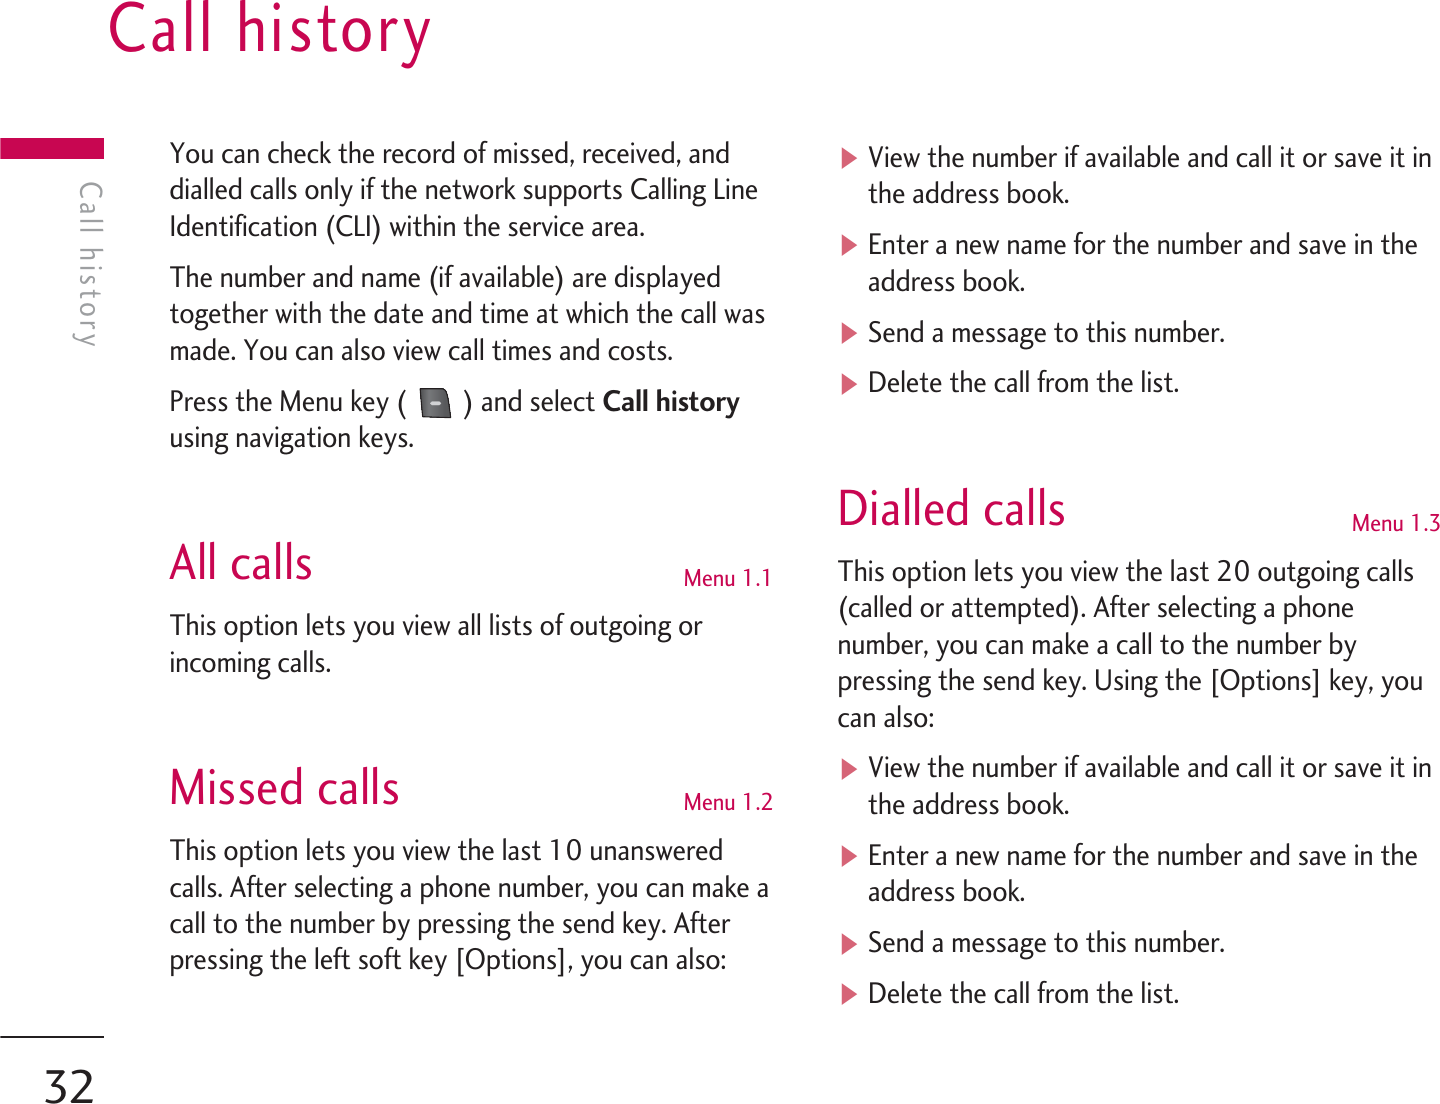 You can check the record of missed, received, anddialled calls only if the network supports Calling LineIdentification (CLI) within the service area.The number and name (if available) are displayedtogether with the date and time at which the call wasmade. You can also view call times and costs.Press the Menu key (  ) and select Call historyusing navigation keys.All calls Menu 1.1This option lets you view all lists of outgoing orincoming calls.Missed calls  Menu 1.2This option lets you view the last 10 unansweredcalls. After selecting a phone number, you can make acall to the number by pressing the send key. Afterpressing the left soft key [Options], you can also:vView the number if available and call it or save it inthe address book.vEnter a new name for the number and save in theaddress book.vSend a message to this number.vDelete the call from the list.Dialled calls Menu 1.3This option lets you view the last 20 outgoing calls(called or attempted). After selecting a phonenumber, you can make a call to the number bypressing the send key. Using the [Options] key, youcan also:vView the number if available and call it or save it inthe address book.vEnter a new name for the number and save in theaddress book.vSend a message to this number.vDelete the call from the list.Call historyCall history32